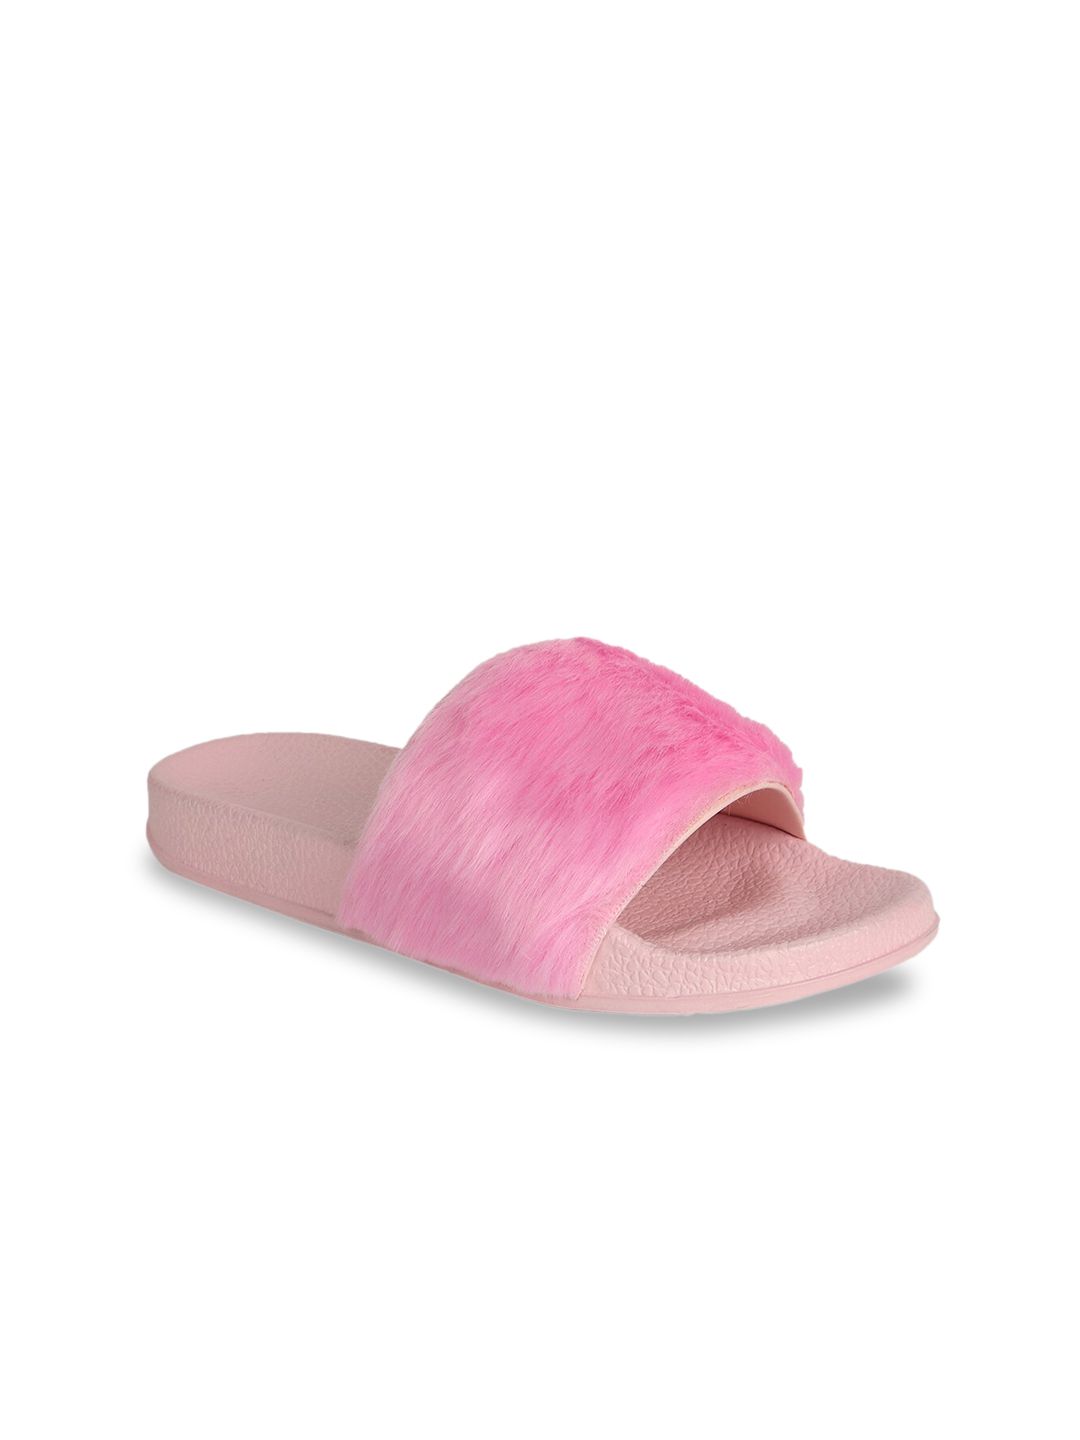 SCENTRA Women Pink Solid Sliders Price in India